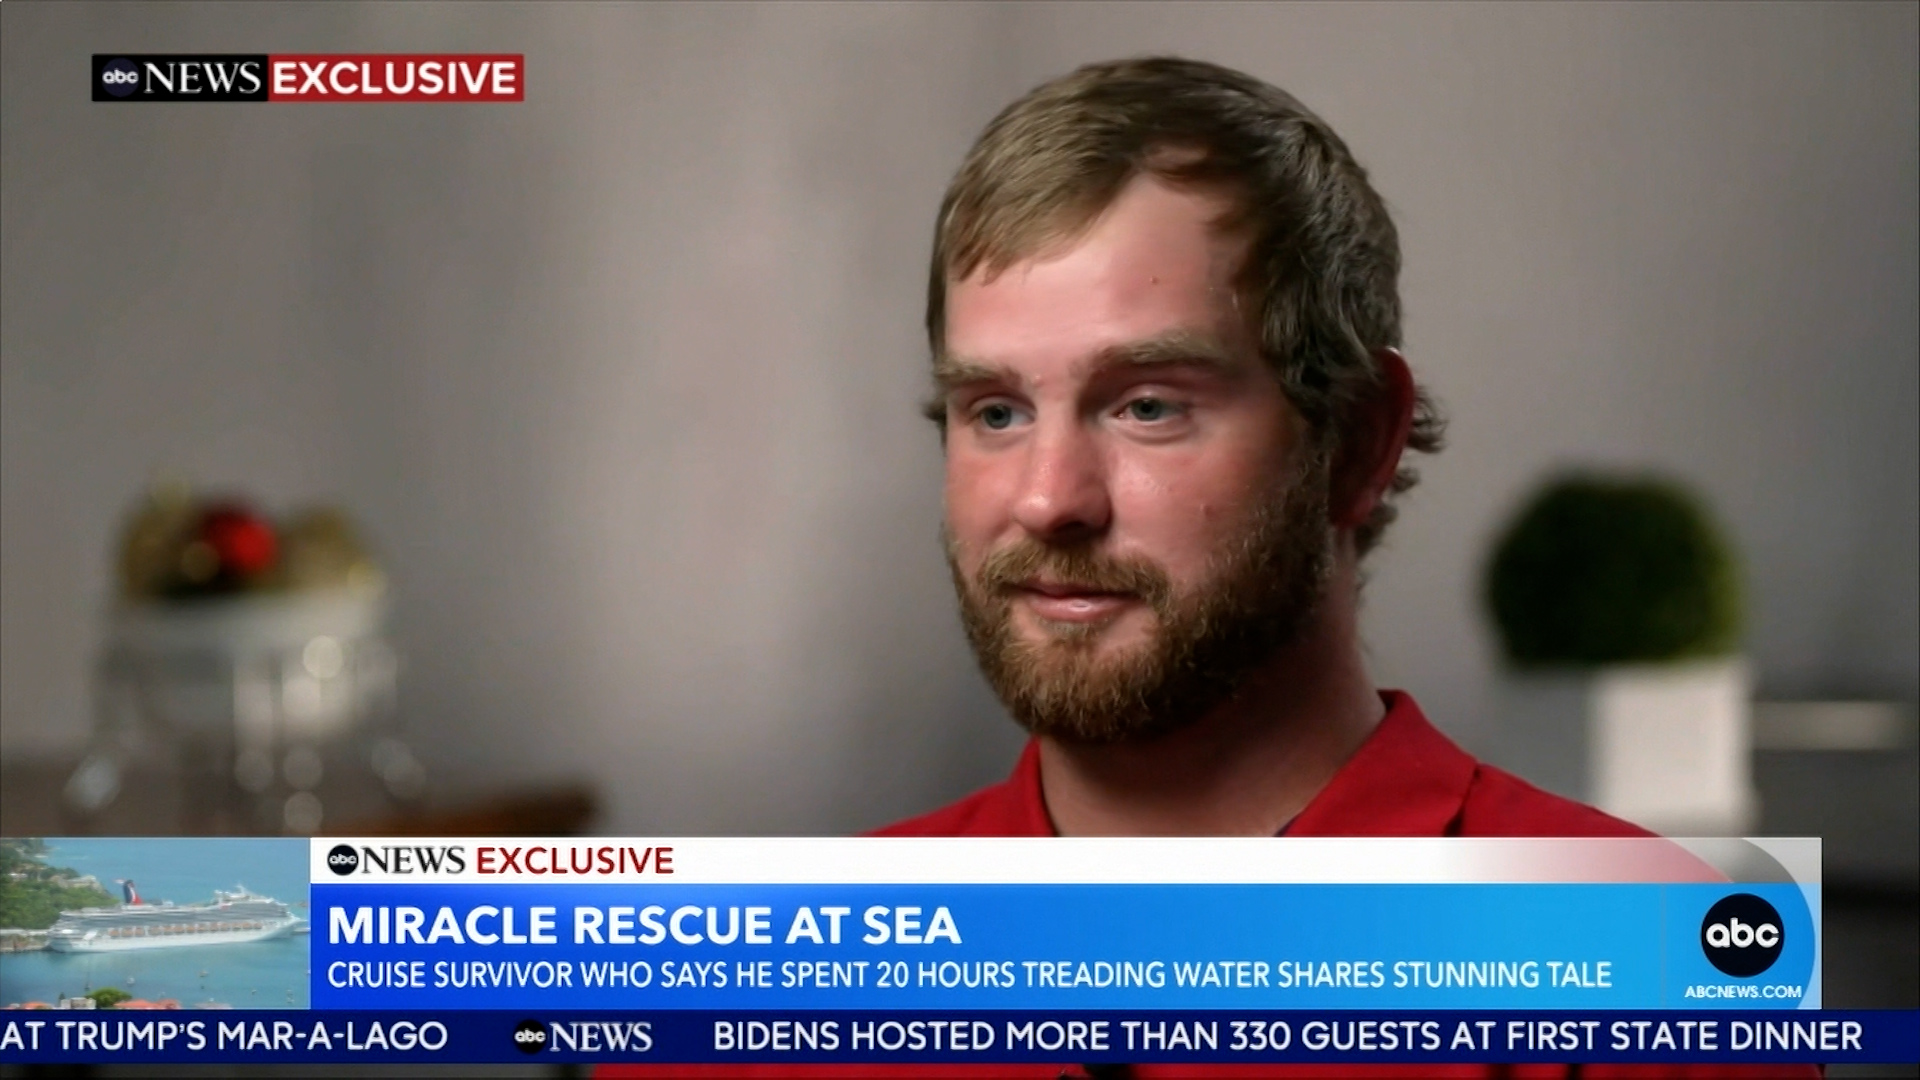 Carnival cruise ship passenger who fell overboard recounts harrowing experience pic